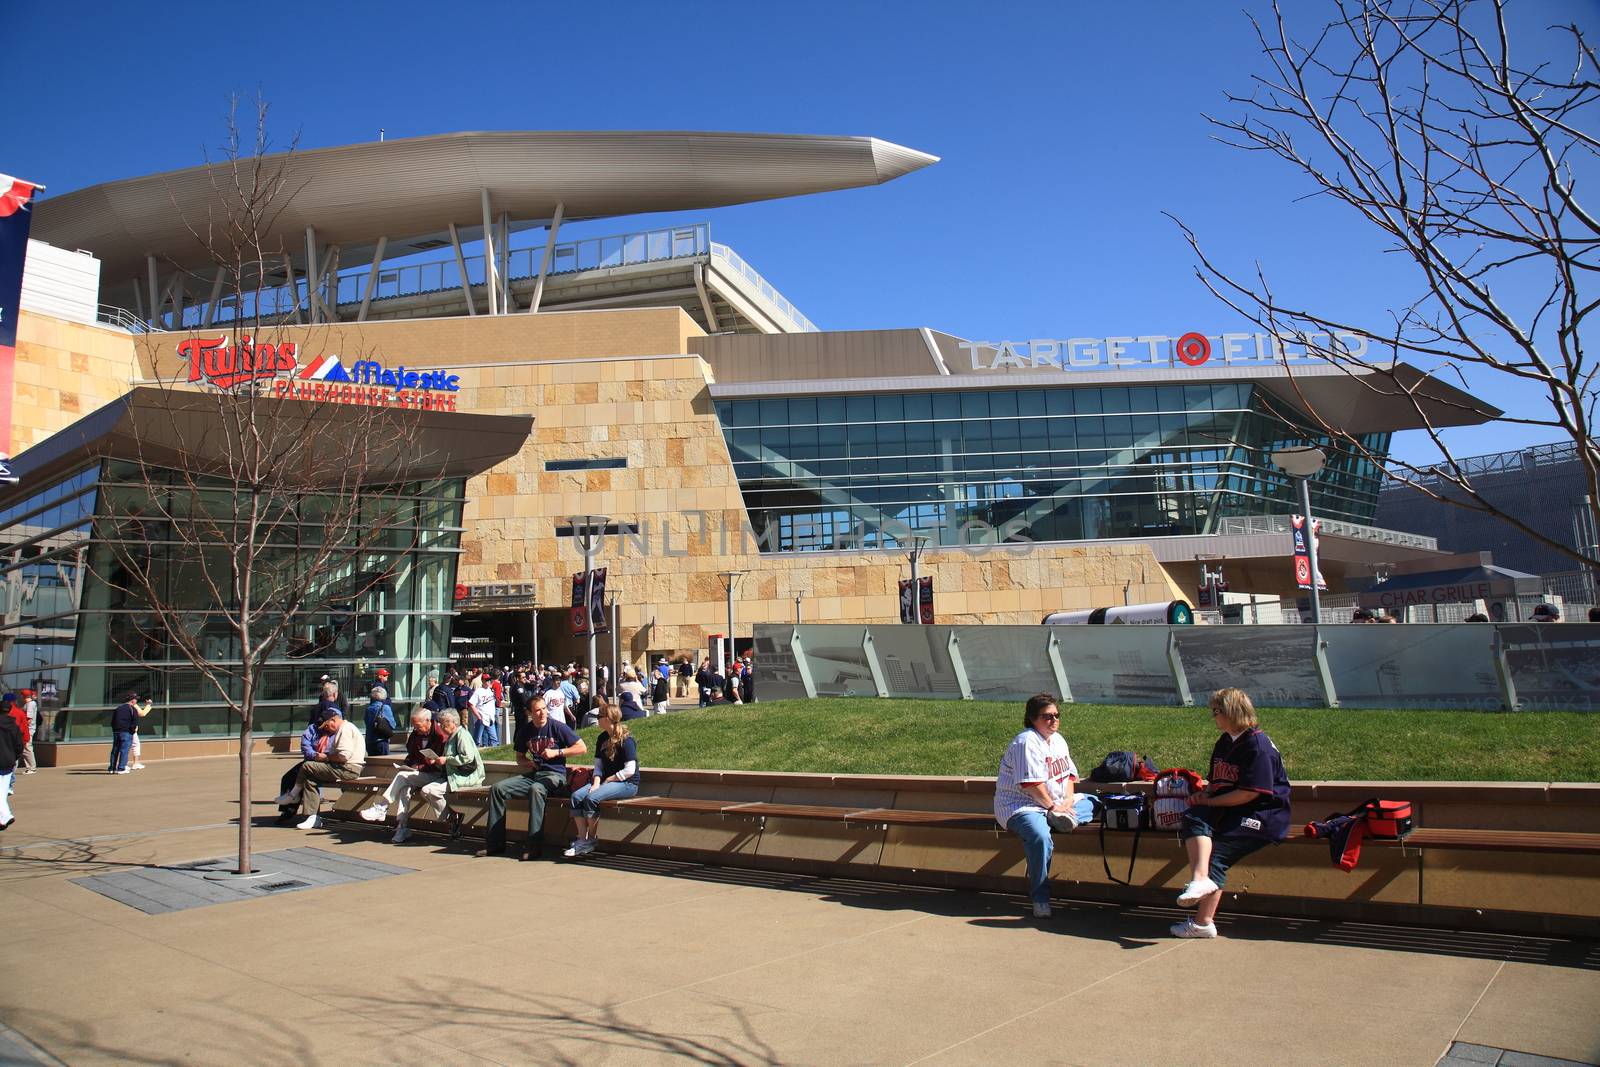 Target Field, ballpark of the Minnesota Twins in Minneapolis which returned outdoor baseball to the twin cities.